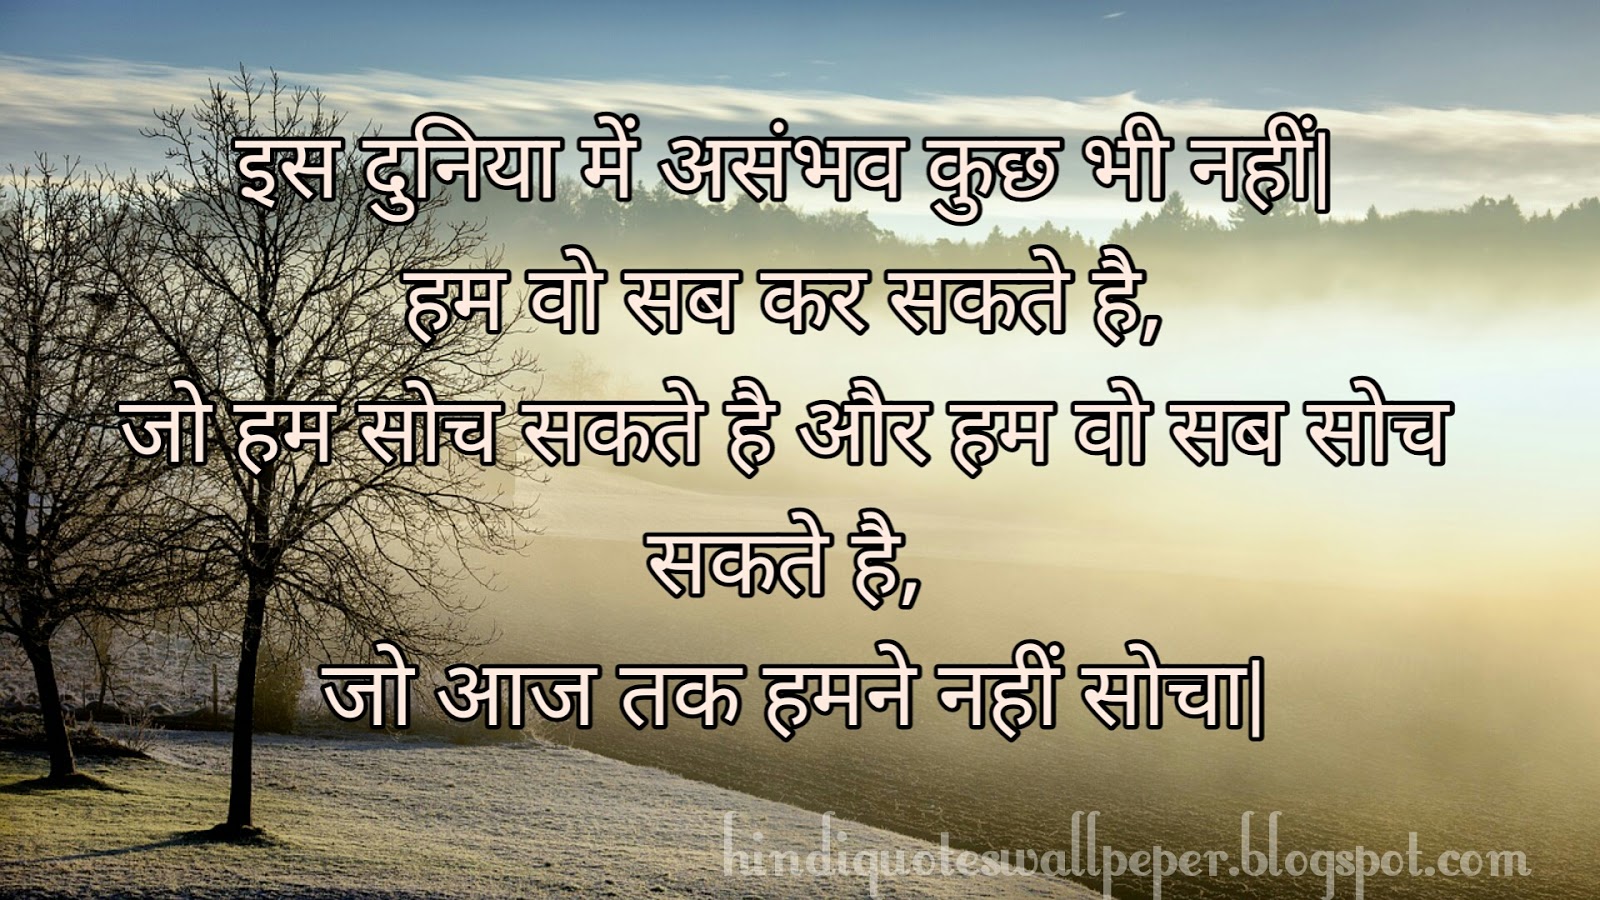 Hindi Quotes Wallpepers Motivational Quotes In Hindi On Success